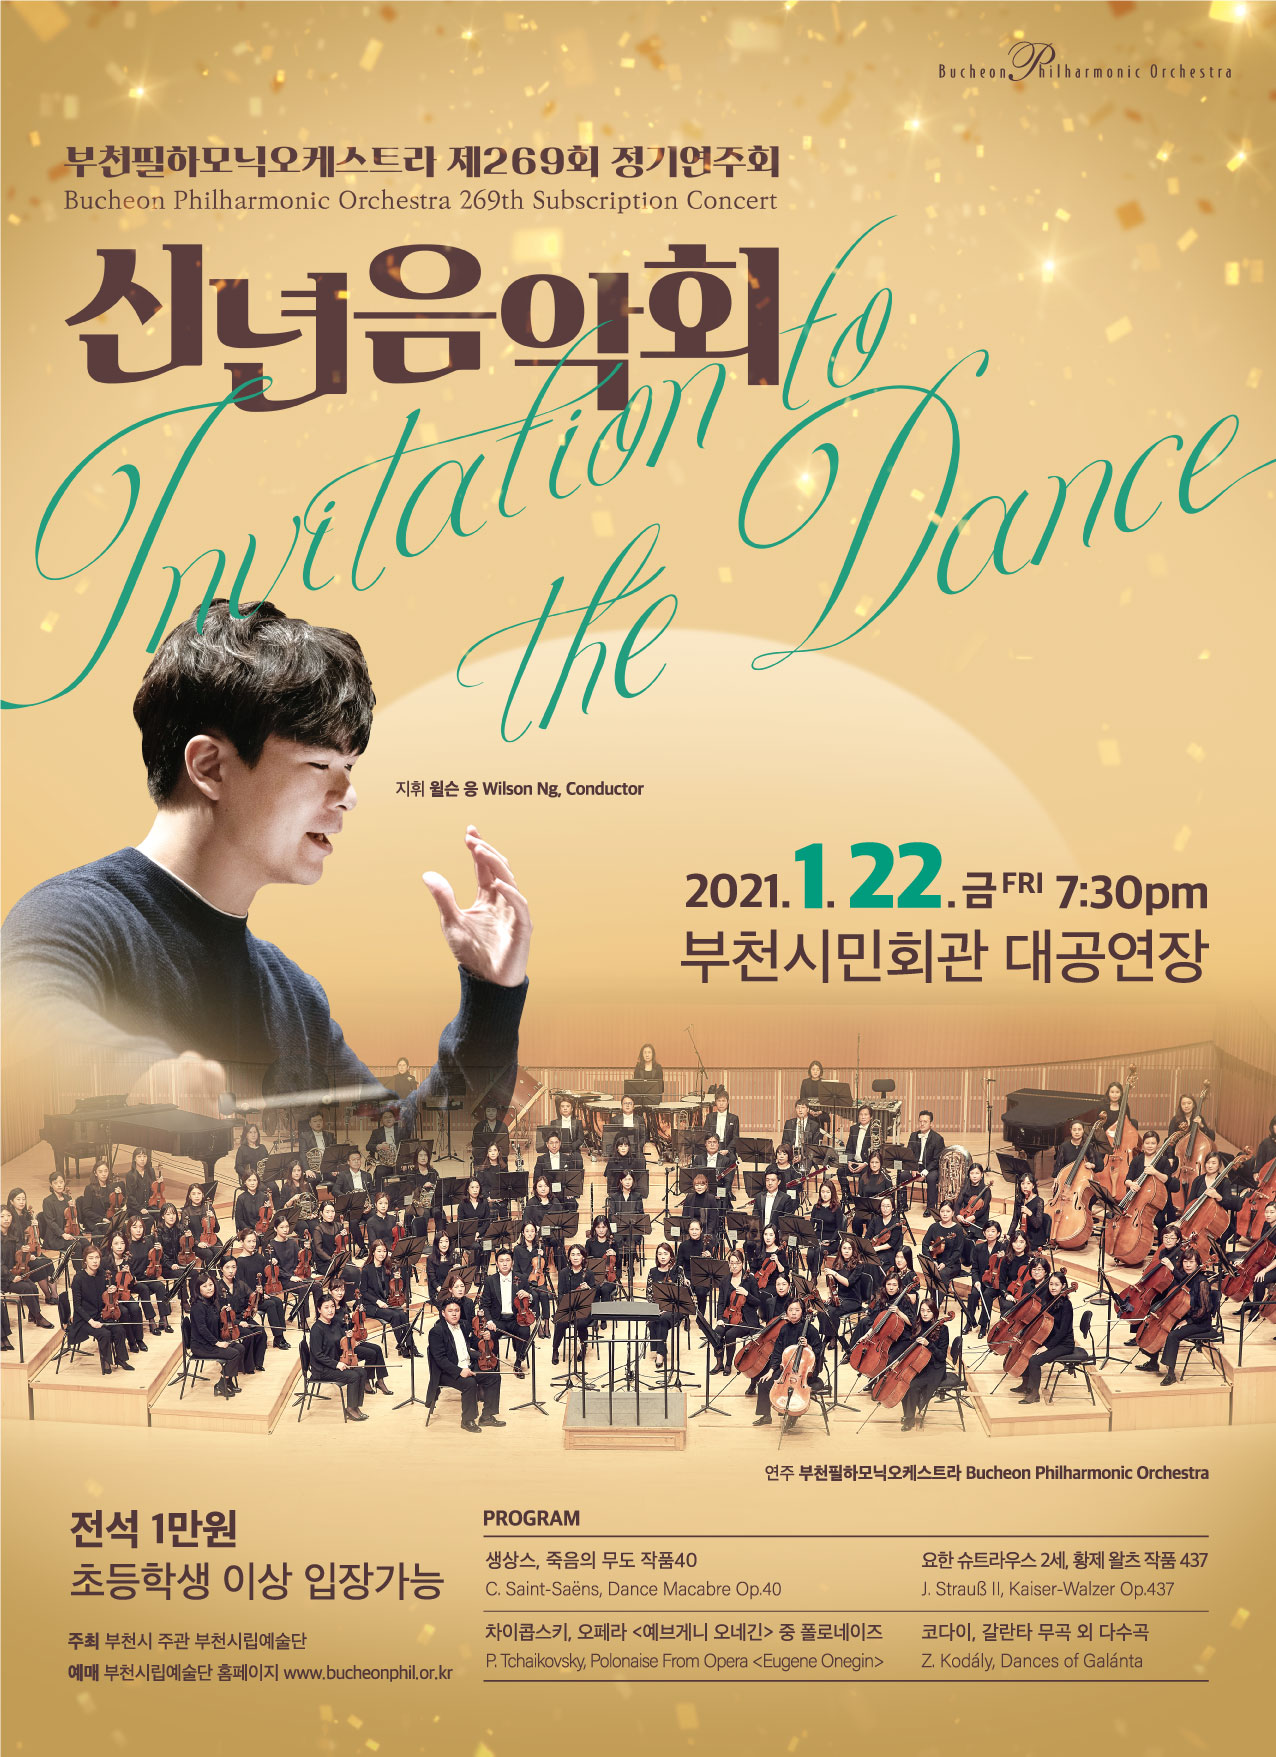 [1.22]Bucheon Philharmonic Orchestra New Year's Concert <Invitation to the Dance>